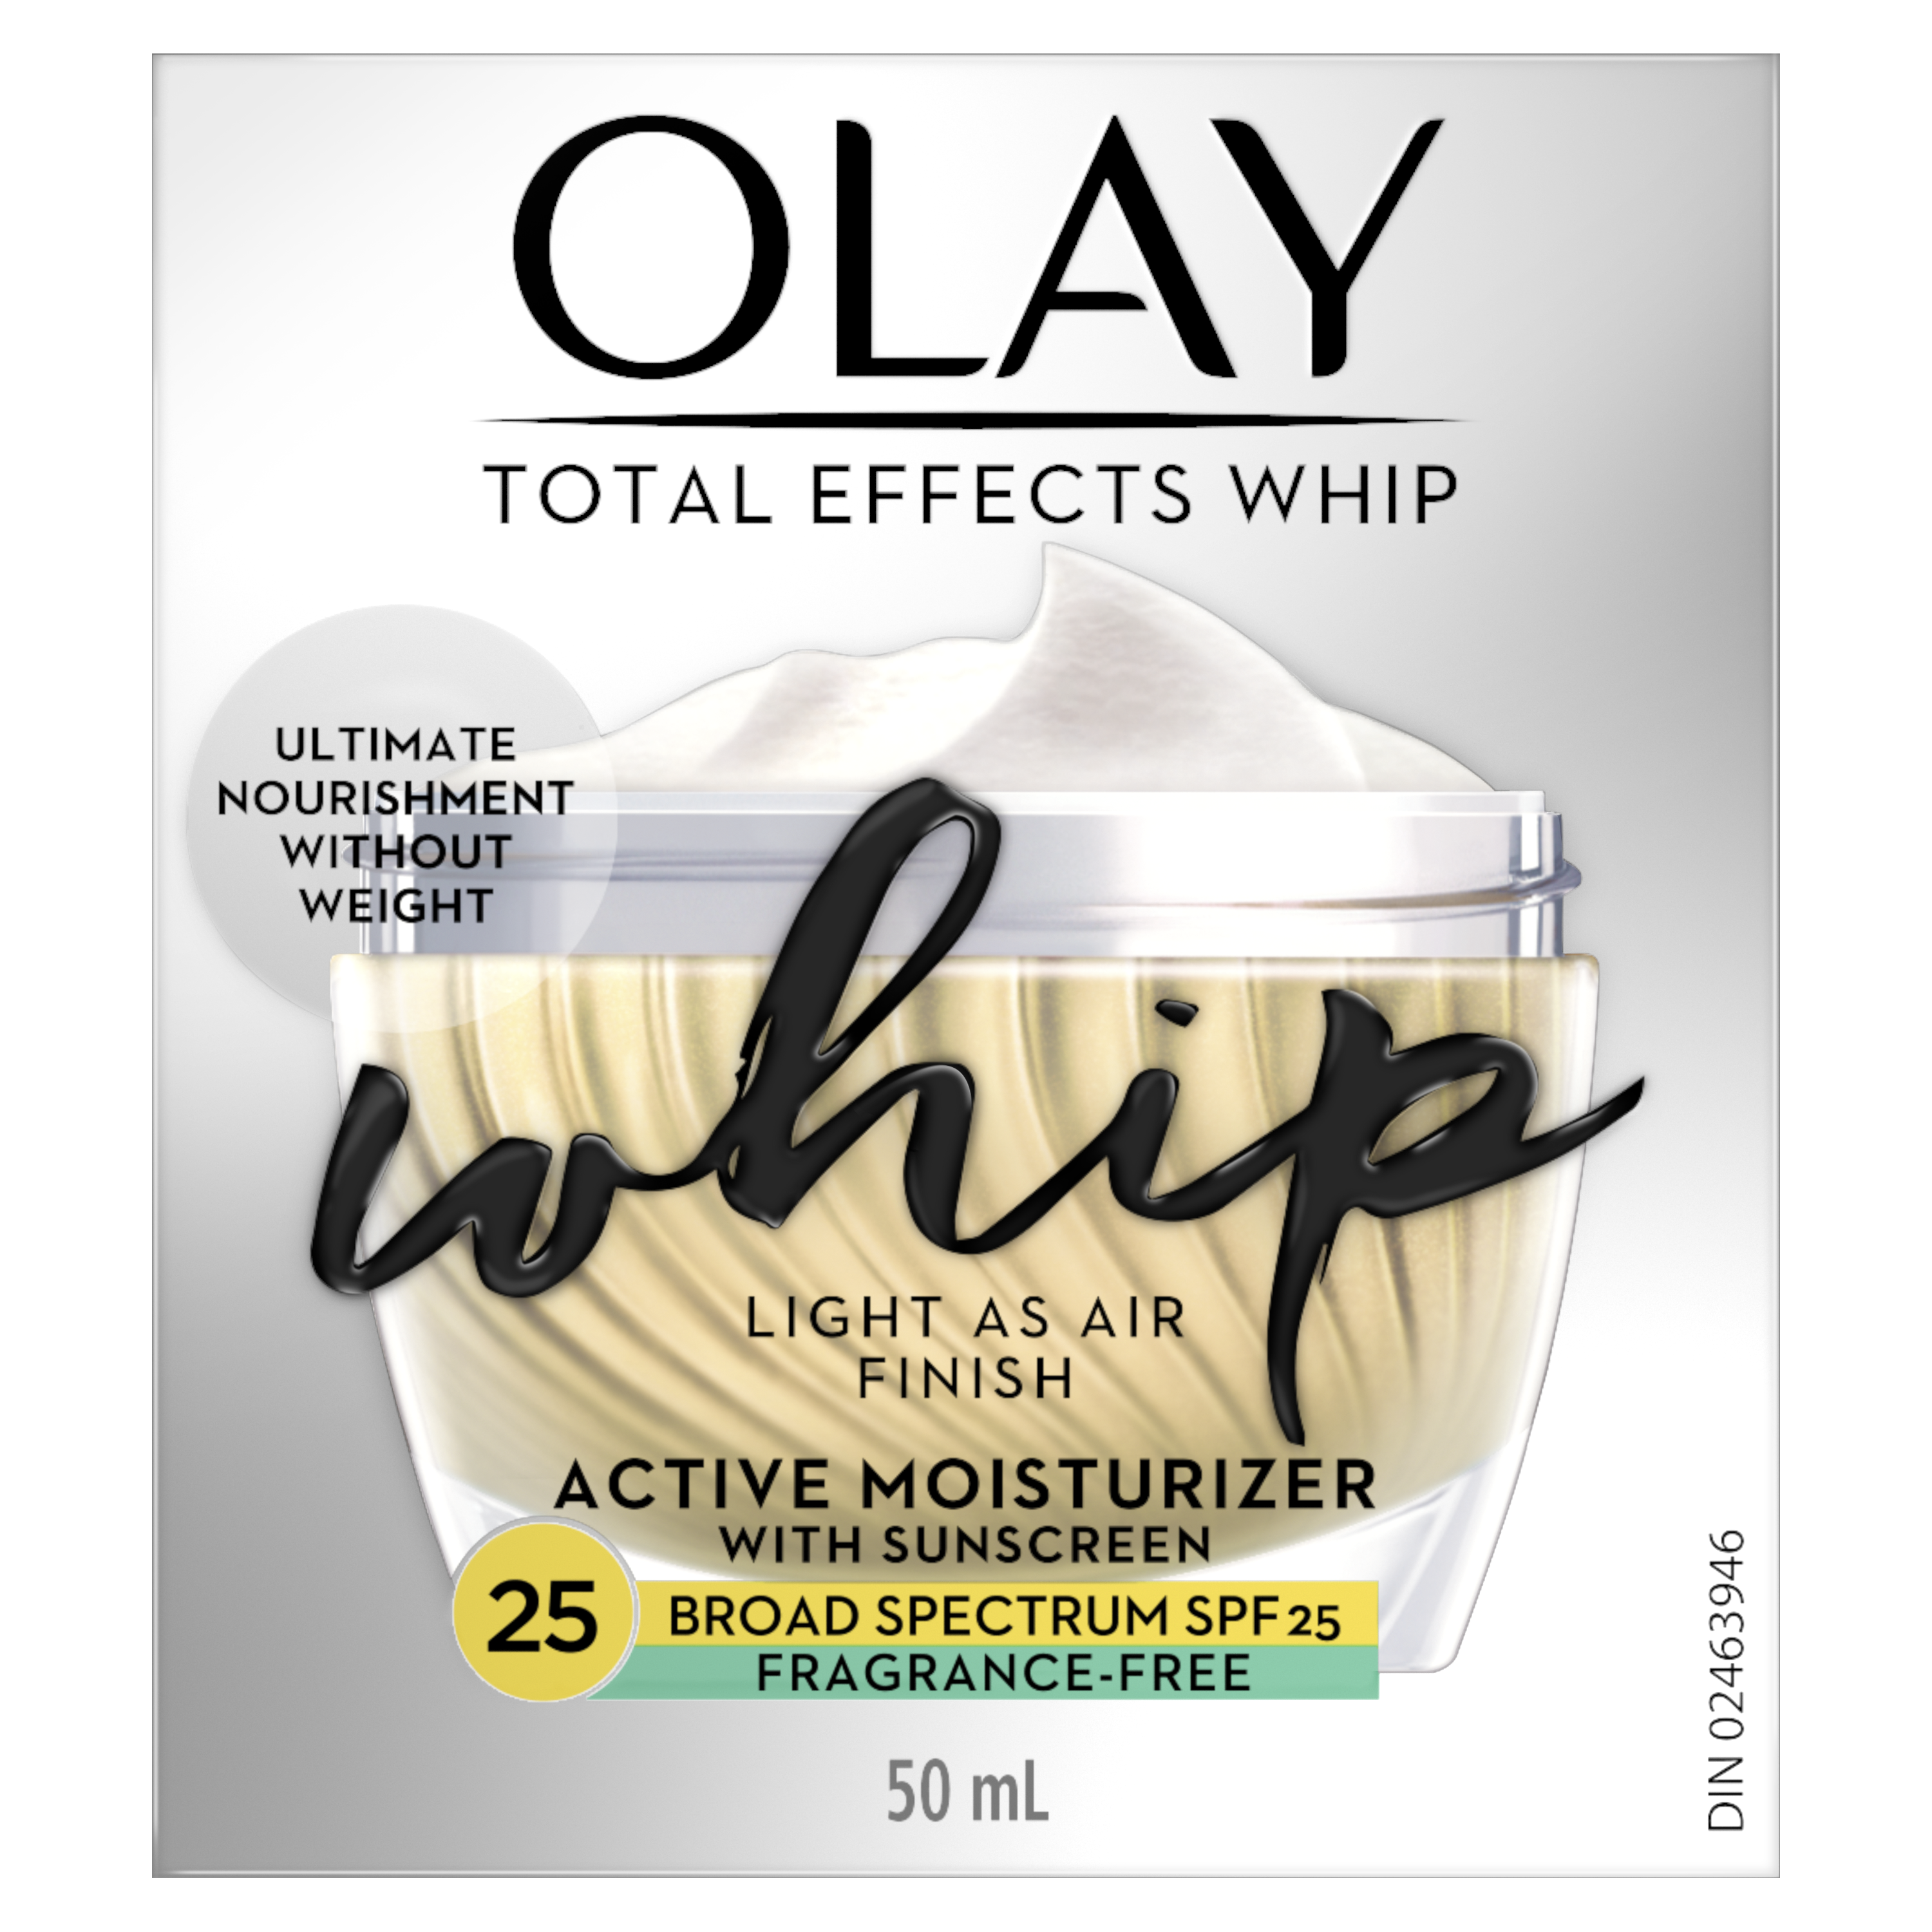 Olay Total Effects Whip Face Moisturizer SPF 25 Fragrance Free 50 ml_1